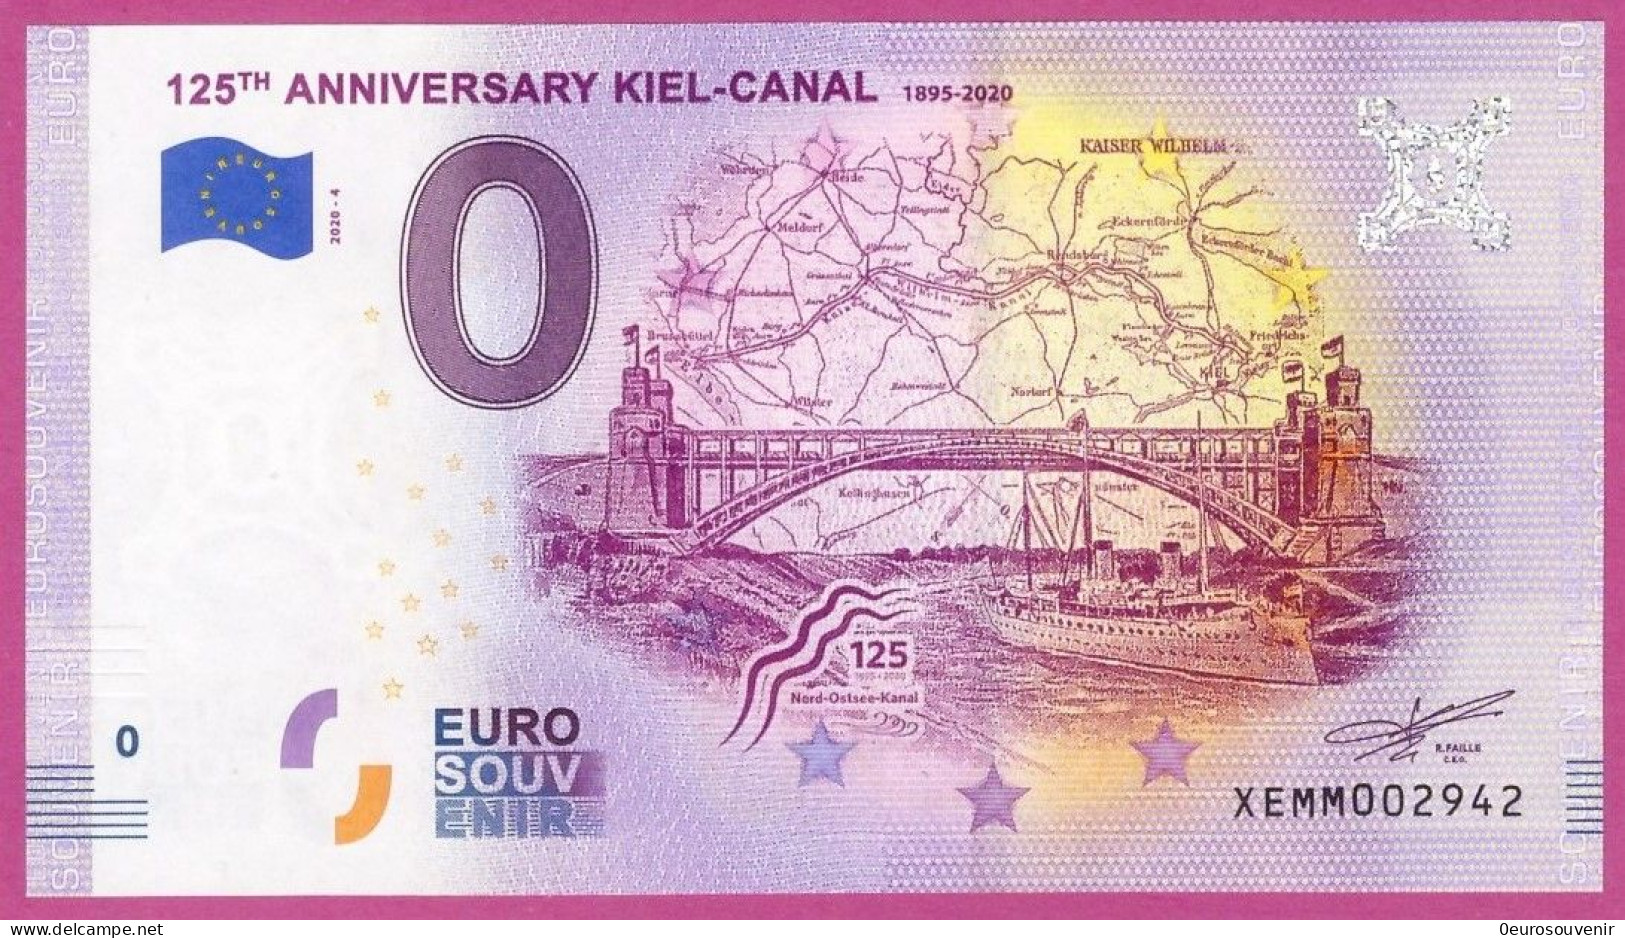 0-Euro XEMM 4 2020 125TH ANNIVERSARY KIEL-CANAL - YACHT VOR BRÜCKE - Private Proofs / Unofficial